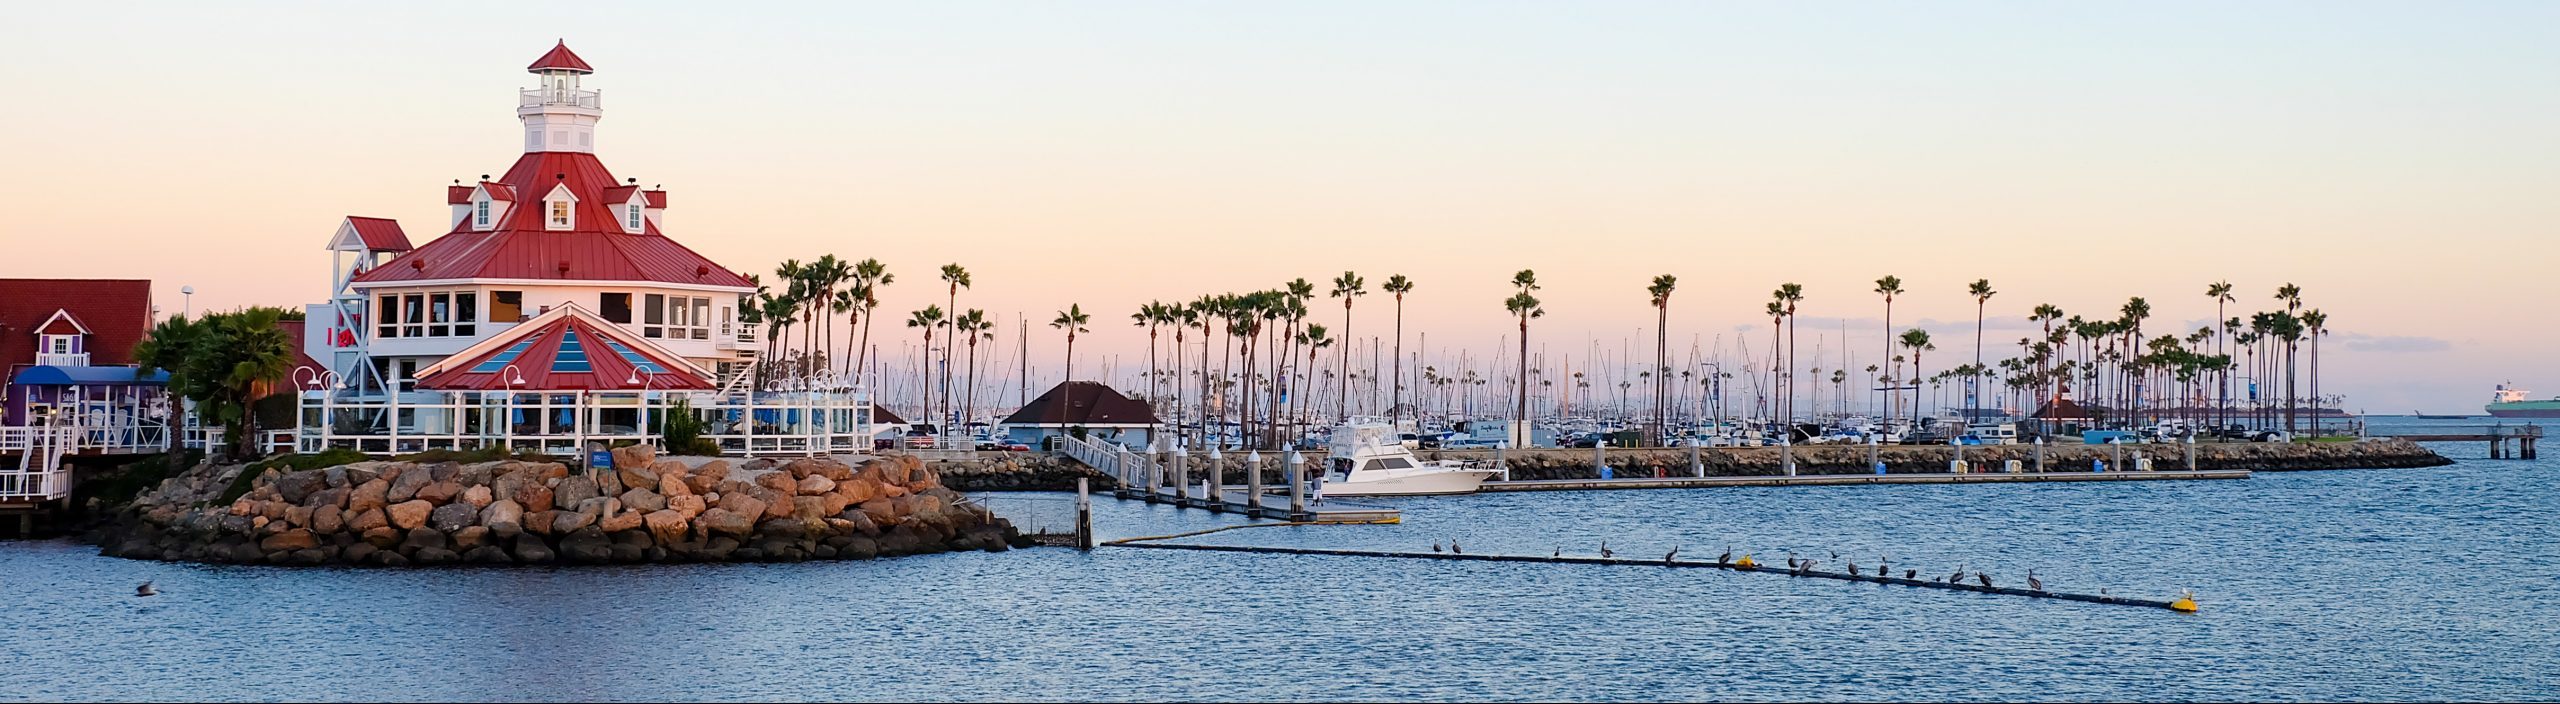 Shoreline Village at Long Beach , CA  in sunset time panorama view